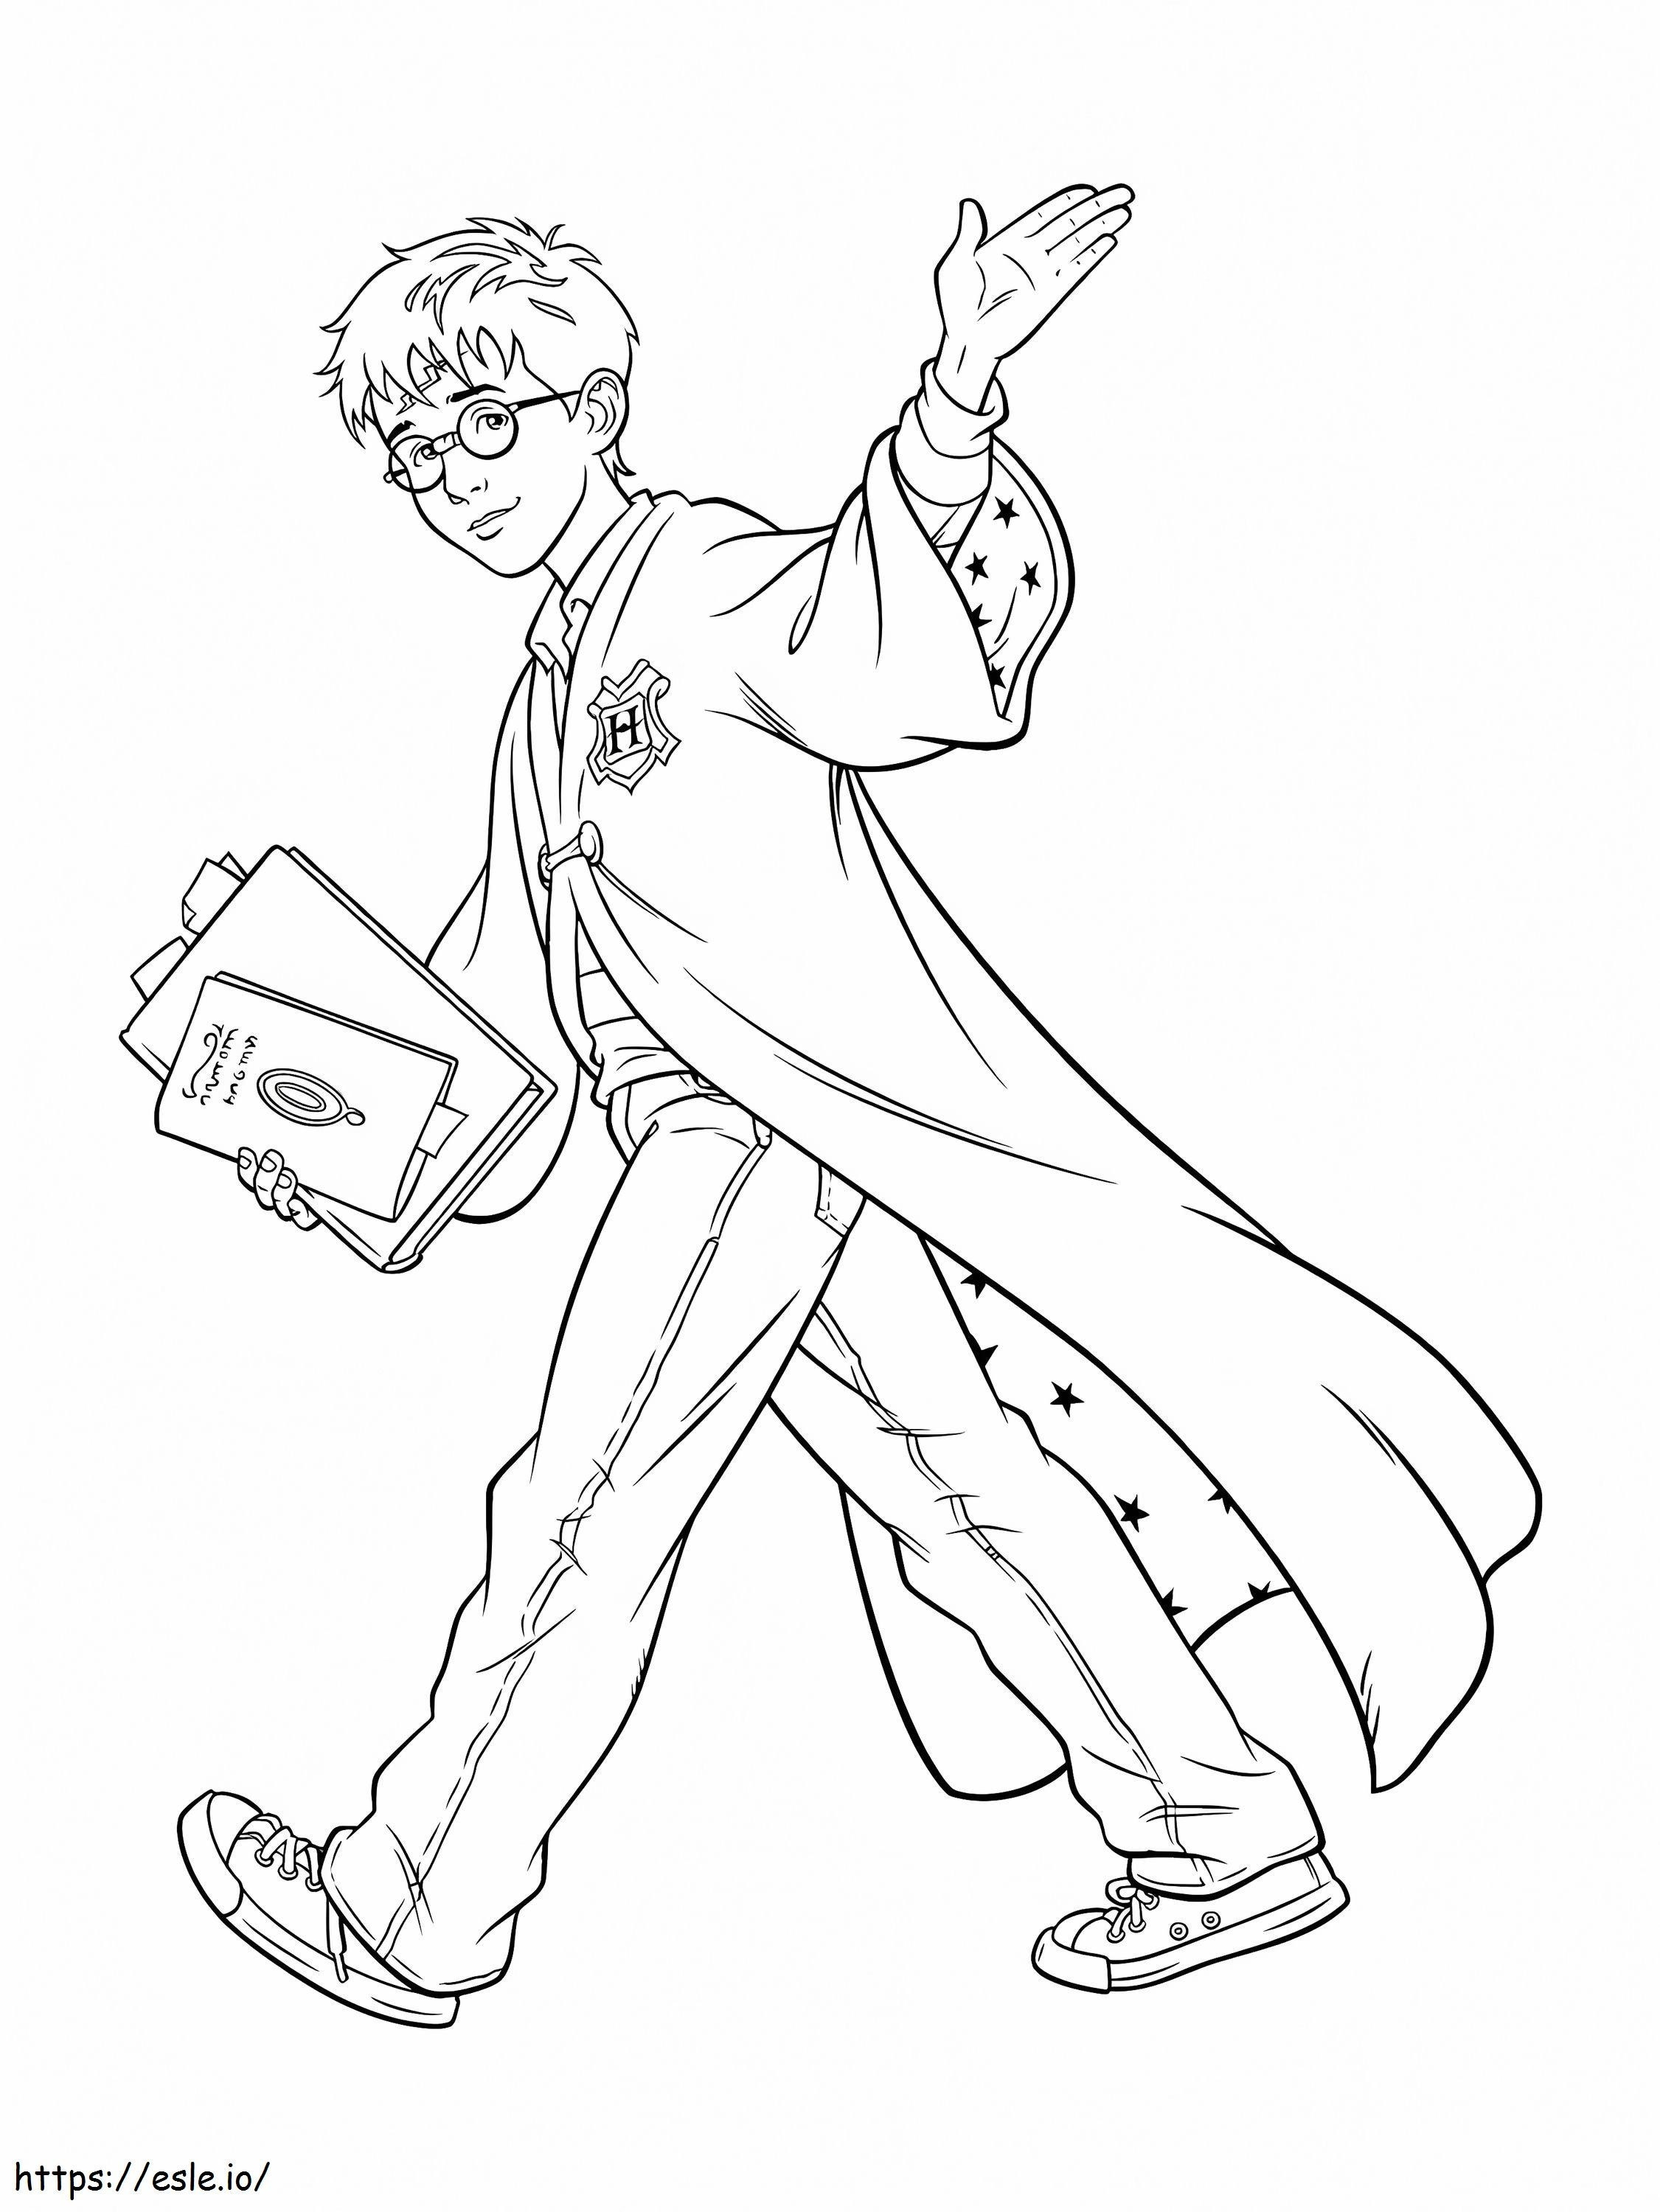 1583828994 Harrypottercoloriage coloring page